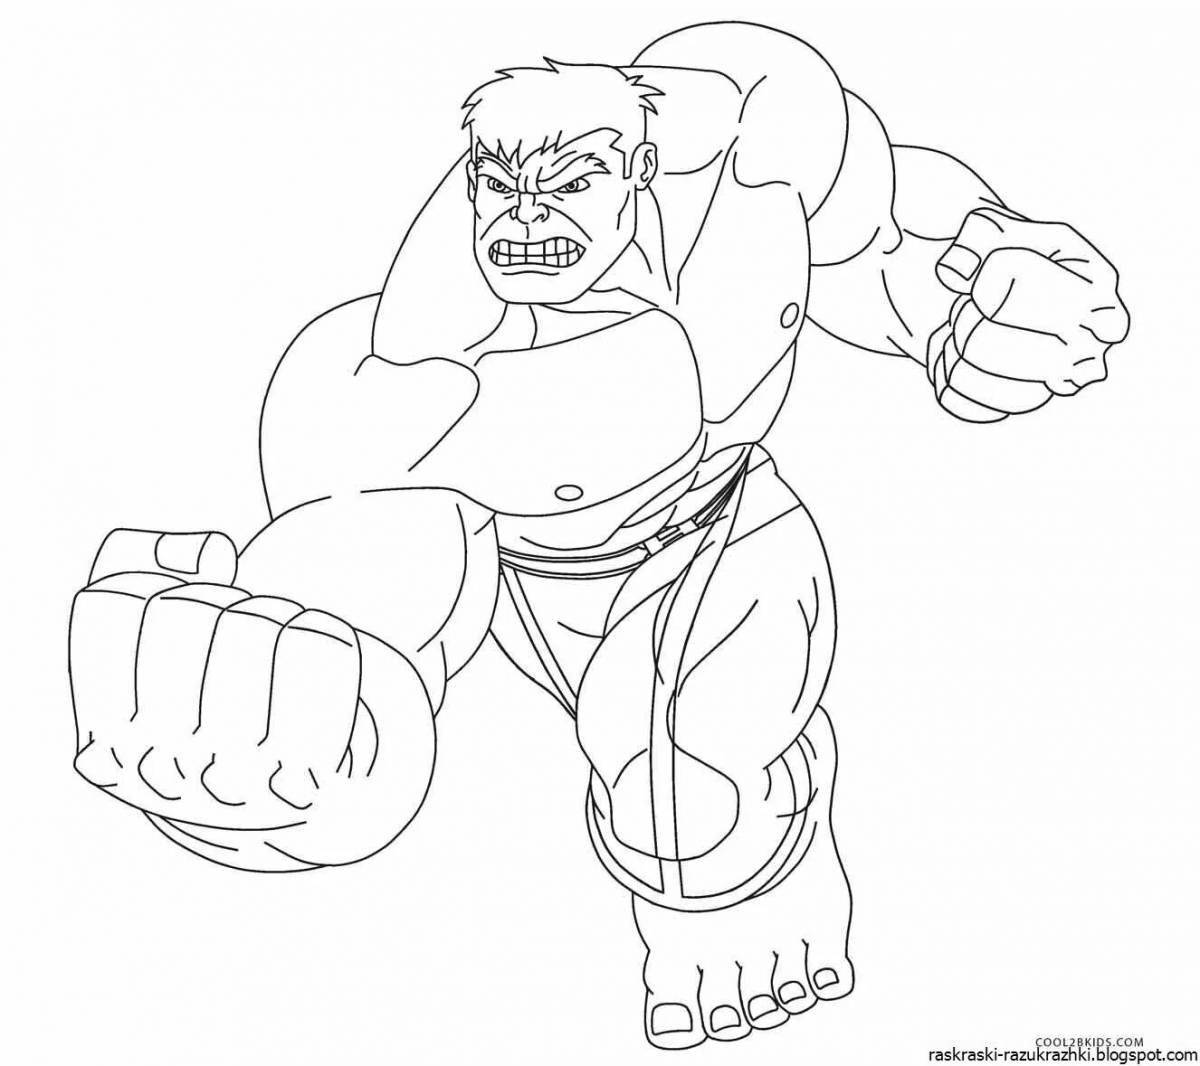 Coloring manly hulk for boys